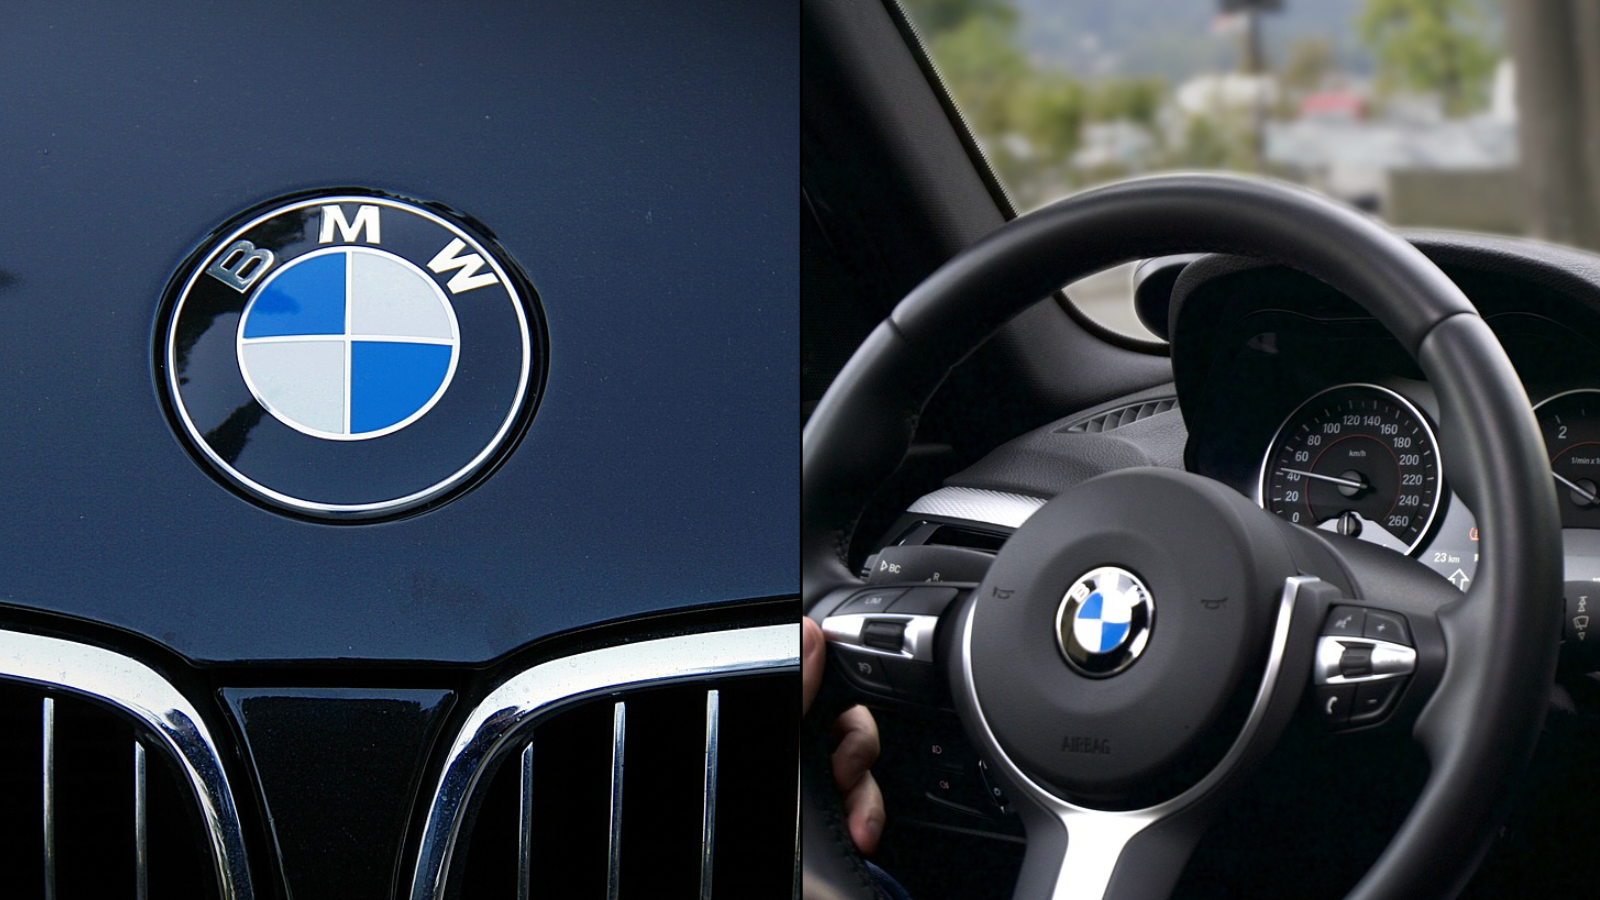 BMW drivers could be eligible for a £10,000 payment in wake of 'dieselgate